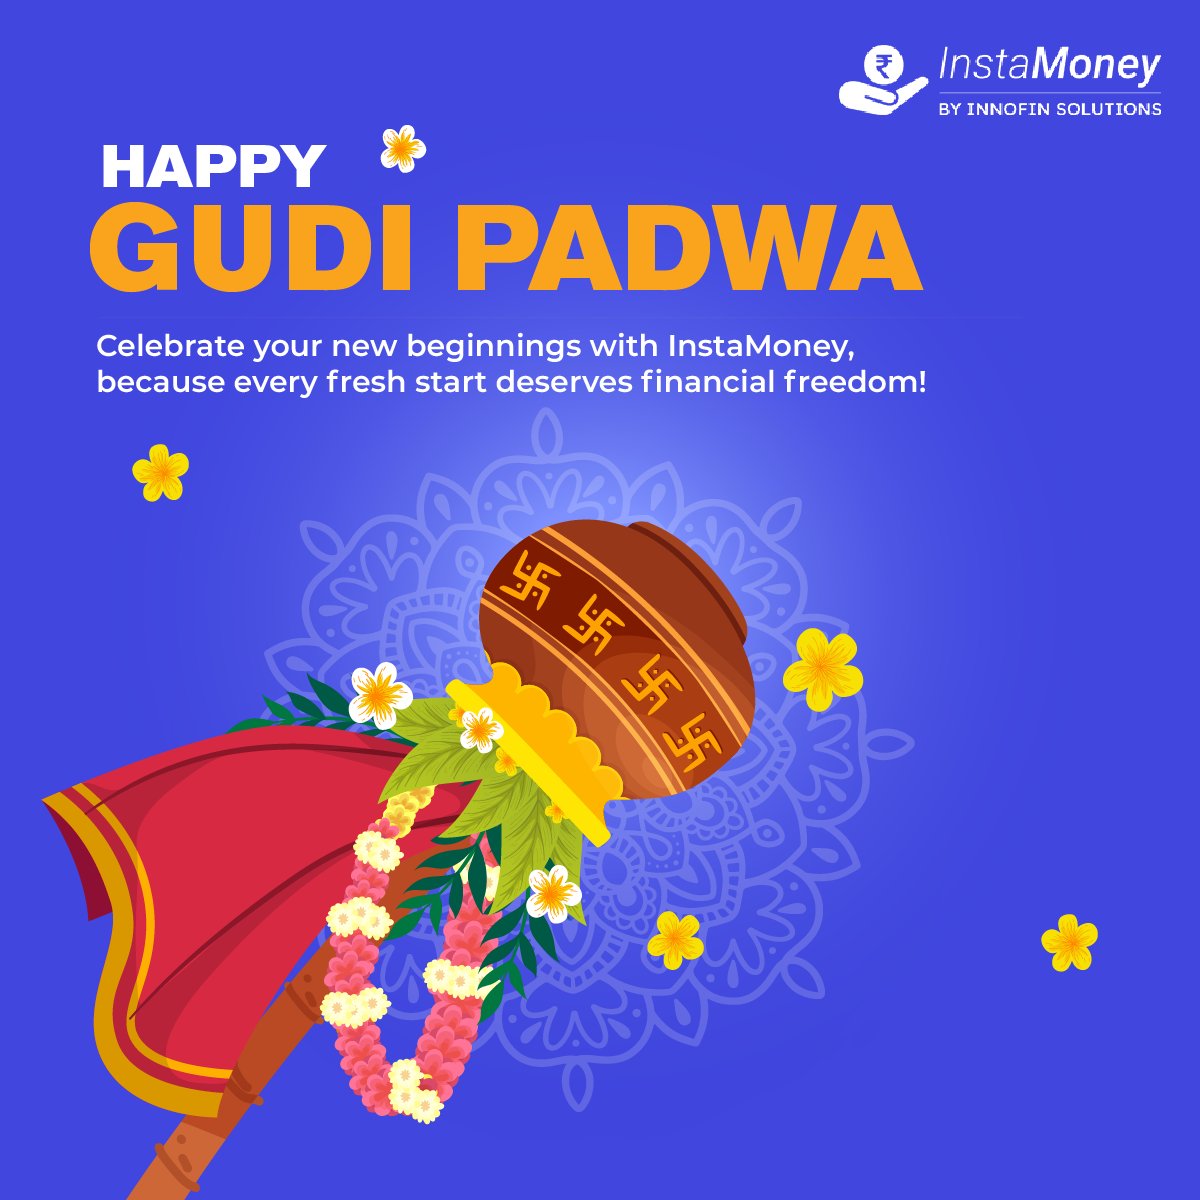 Happy Gudi Padwa! On this auspicious day, may you move closer to achieving financial freedom & living the life you've always envisioned. #InstaMoney #HappyGudiPadwa #LiveYourLife #GudiPadwa #QuickLoans #FinancialFreedom #InstantLoans #Fintech #LoanApp #PersonalLoan #InstantCash